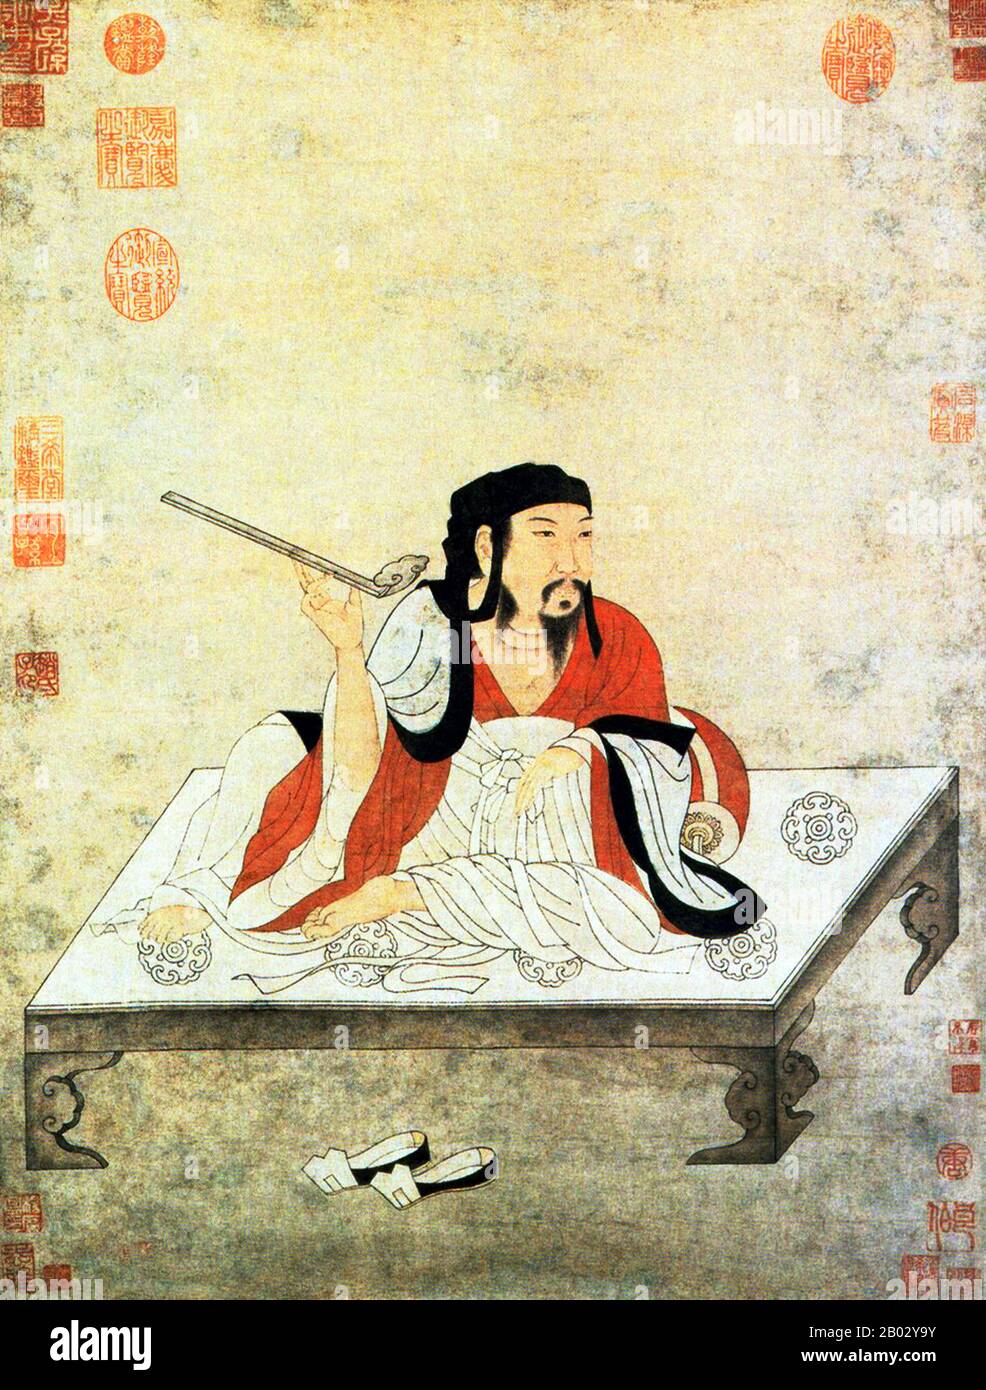 Zhuge Liang (CE 181-234) was Chancellor of Shu Han during the Three Kingdoms period of Chinese history. He is often recognised as the greatest and most accomplished strategist of his era. Often depicted wearing a robe and holding a fan made of crane feathers, Zhuge was not only an important military strategist and statesman; he was also an accomplished scholar and inventor.  His reputation as an intelligent and learned scholar grew even while he was living in relative seclusion, earning him the nickname Wolong (literally Crouching Dragon). Zhuge is an uncommon two-character compound family nam Stock Photo